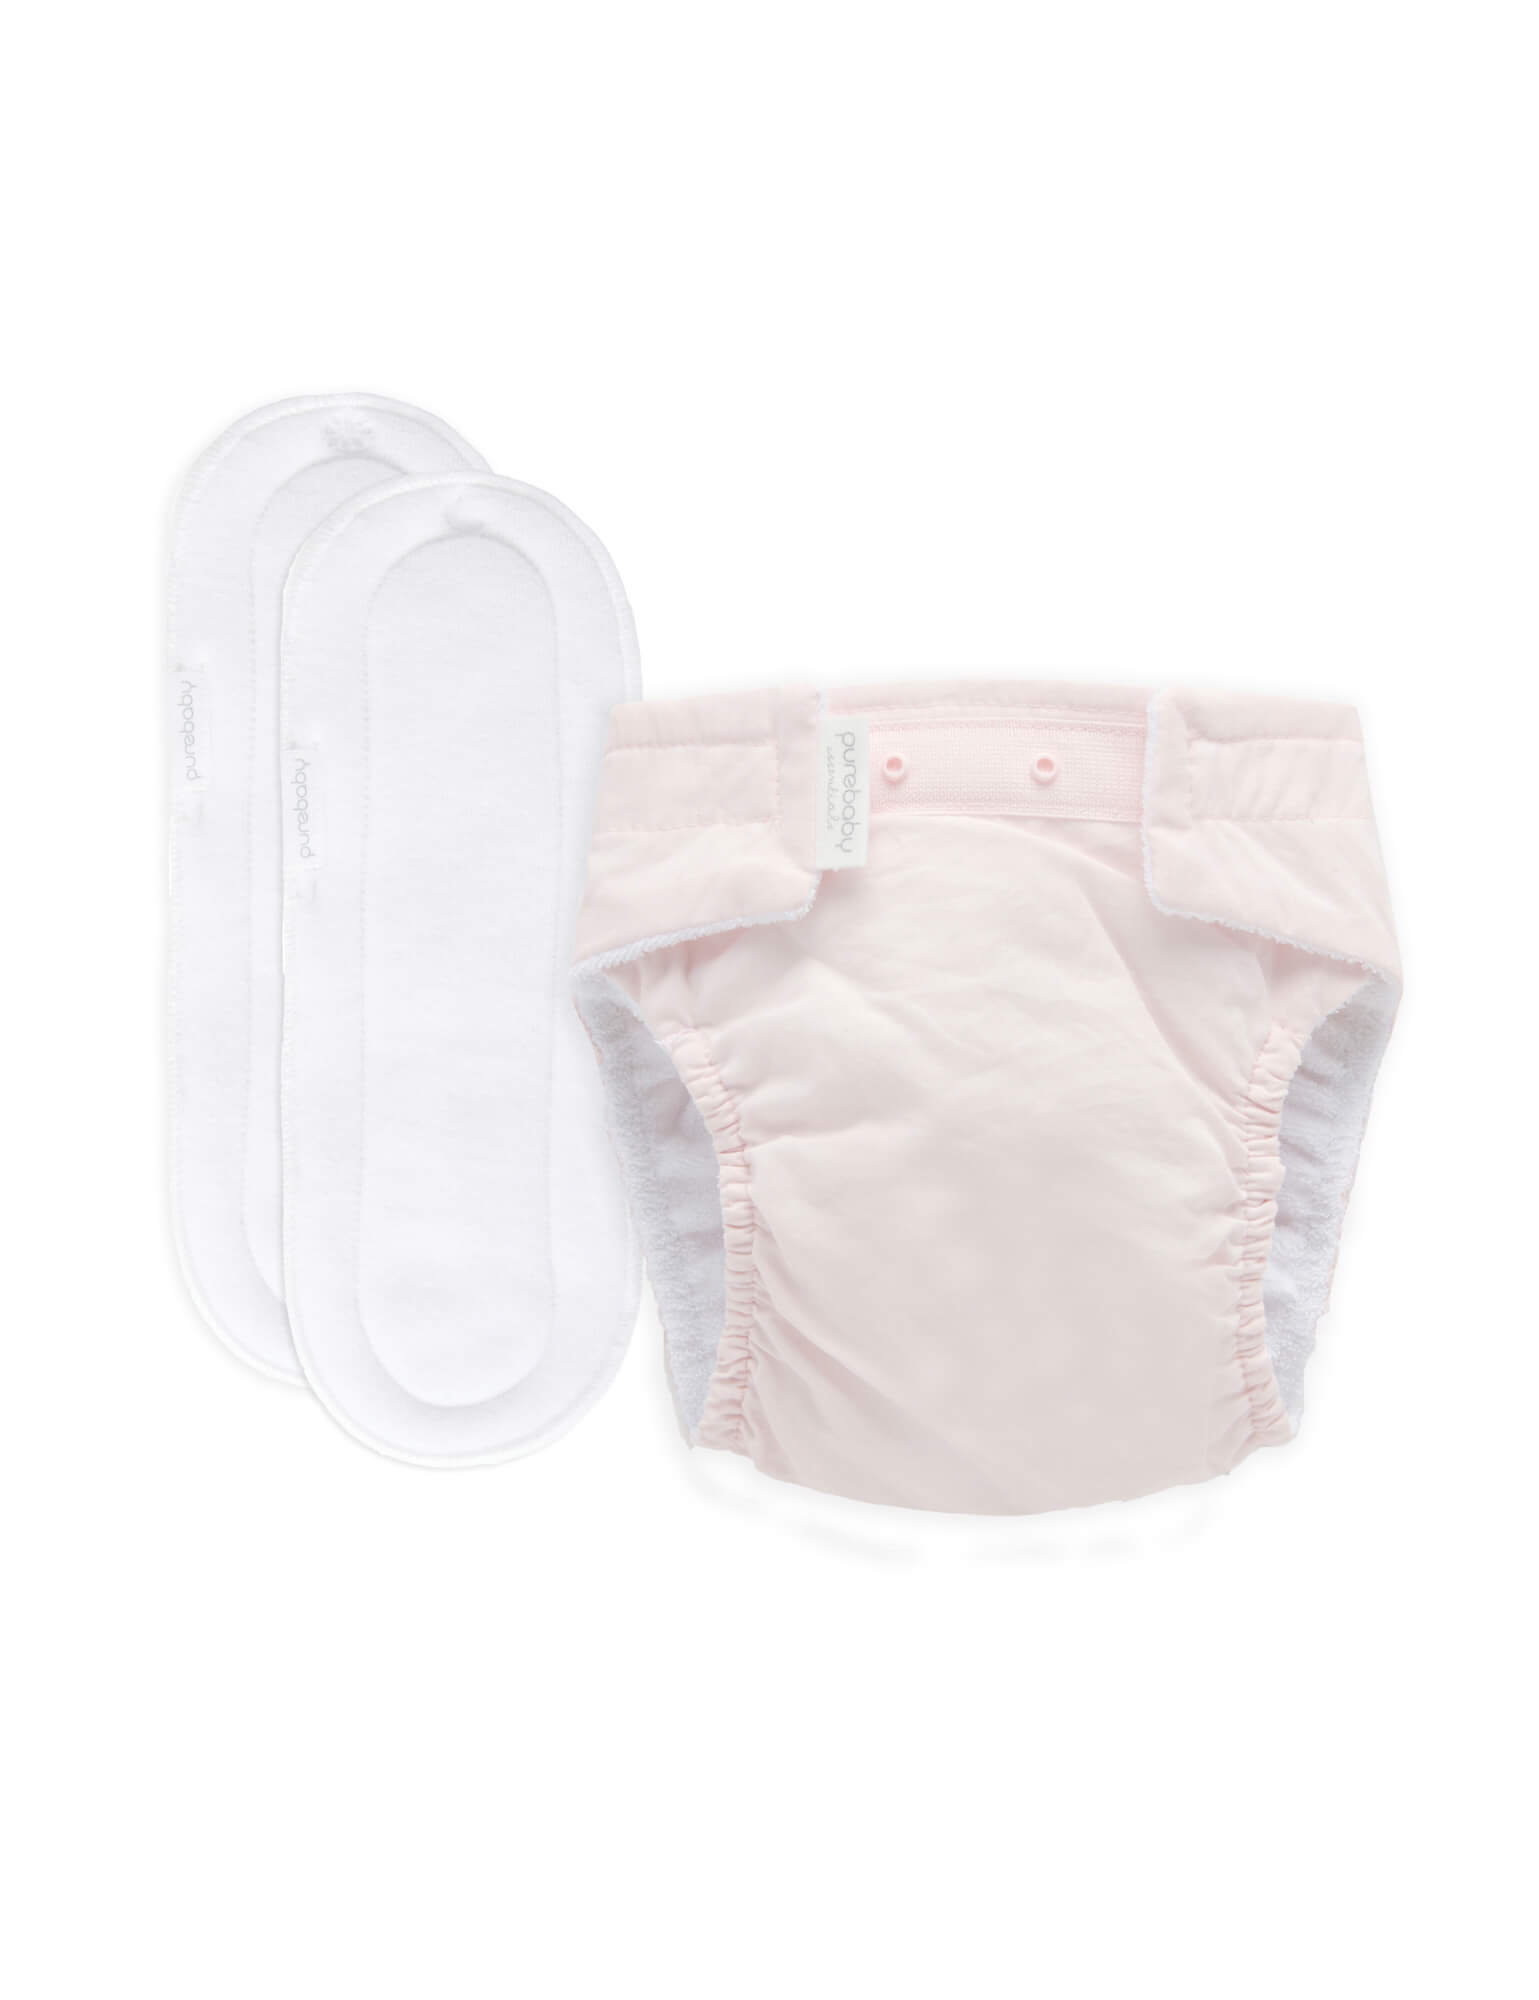 Reusable Nappy Starter Kit in Pale Pink